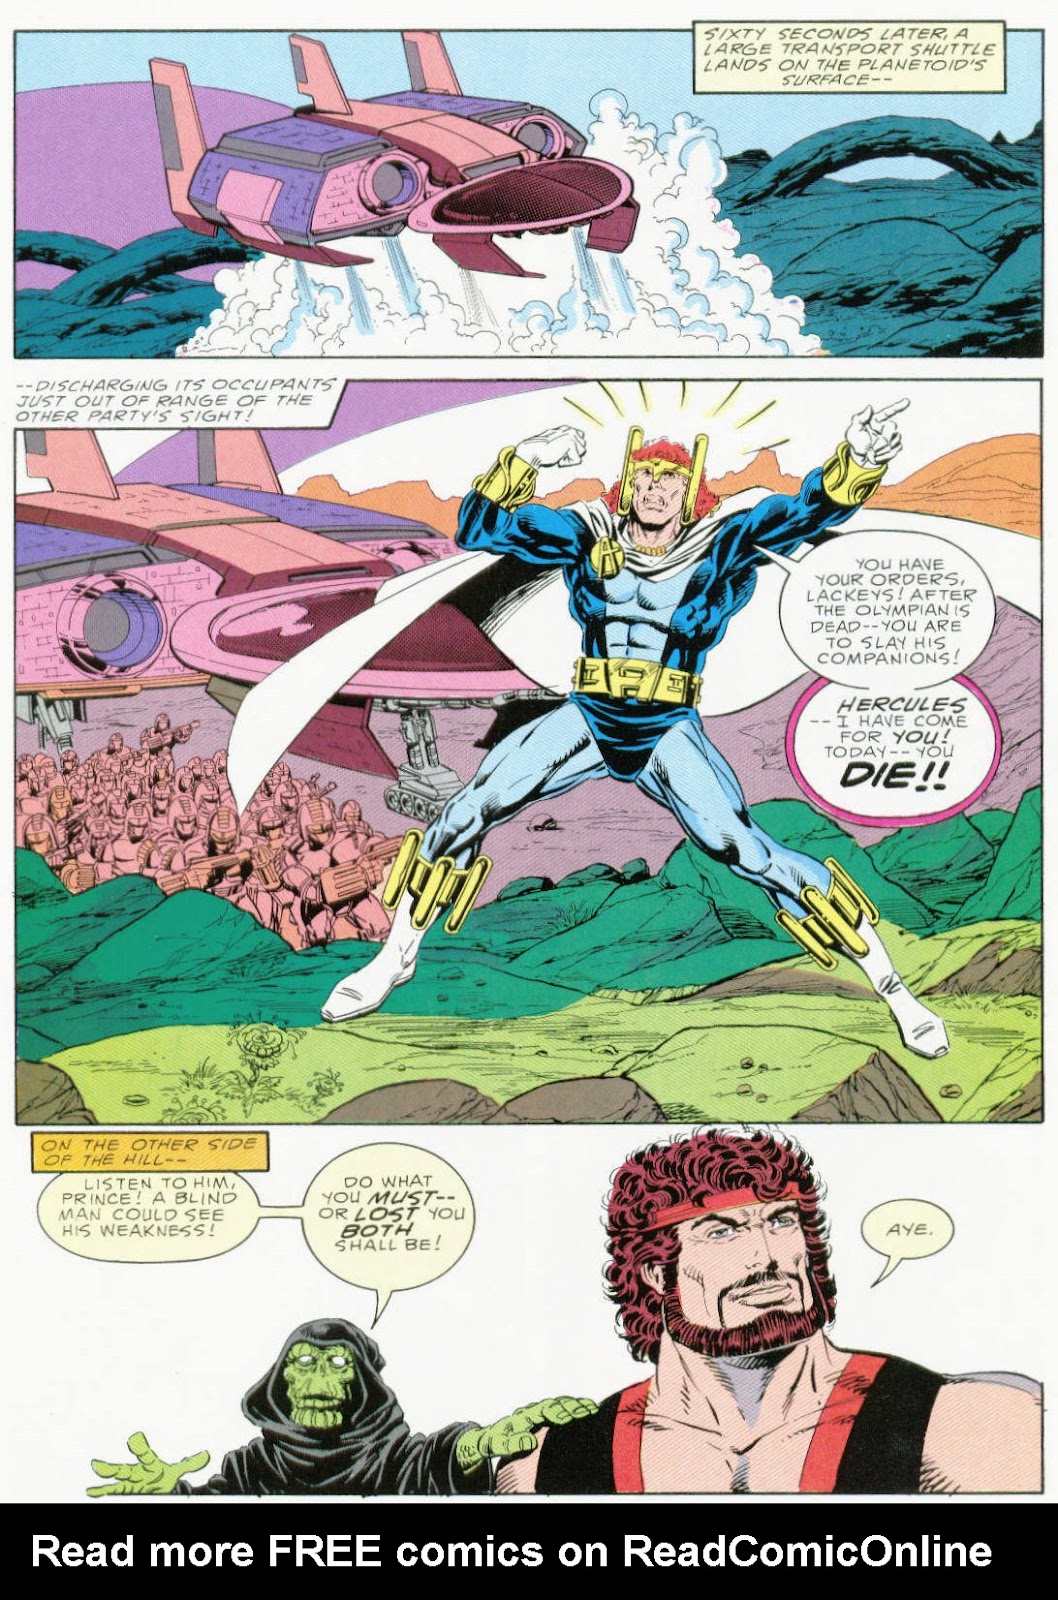 Marvel Graphic Novel issue 37 - Hercules Prince of Power - Full Circle - Page 65